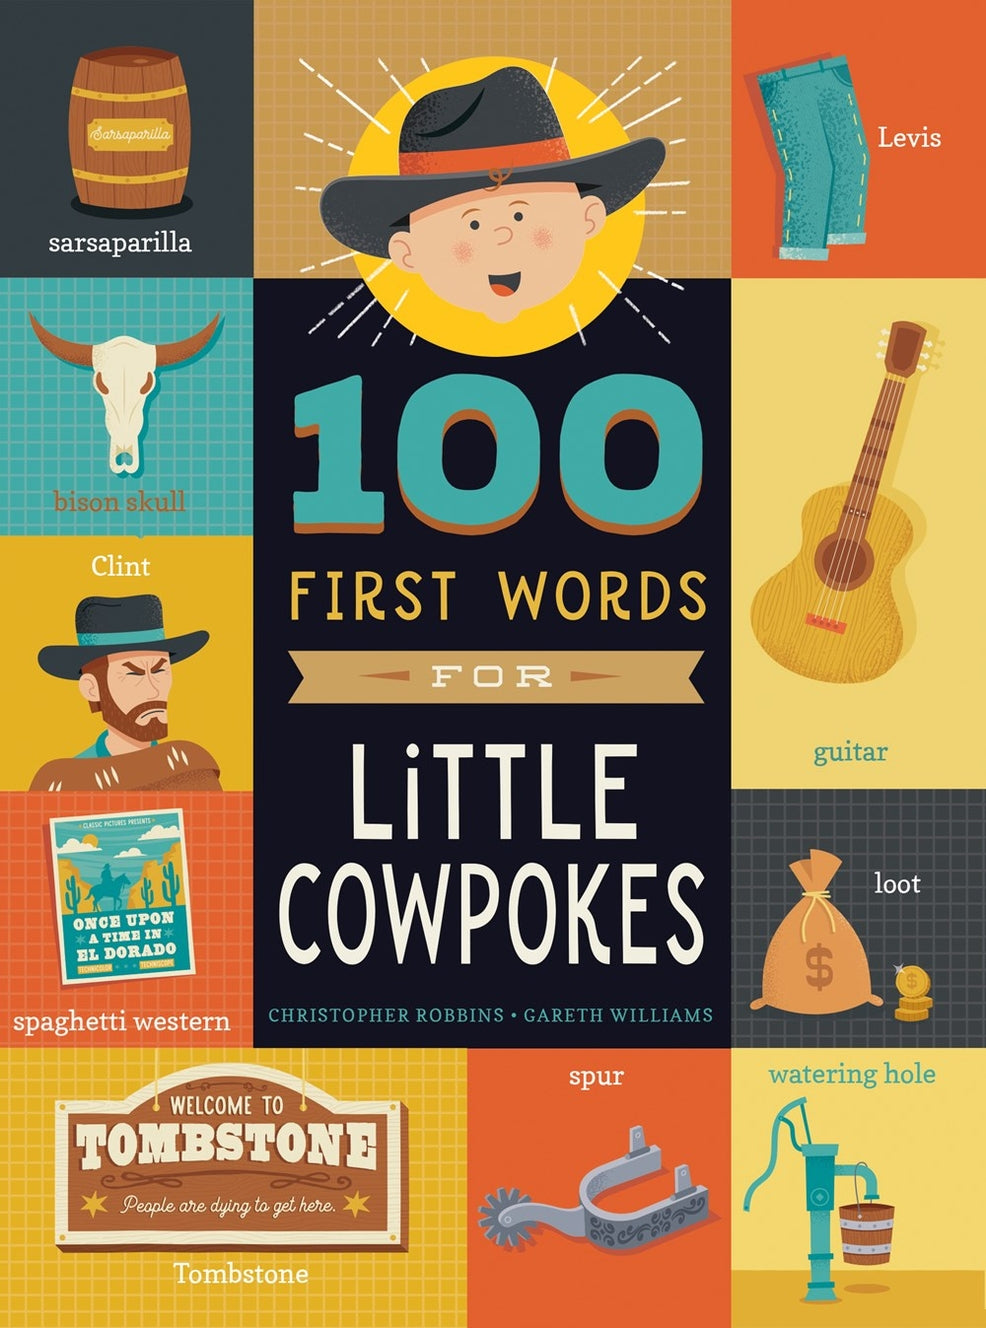 '100 First Words For Little Cowpokes' Board Book | by Christopher Robbins